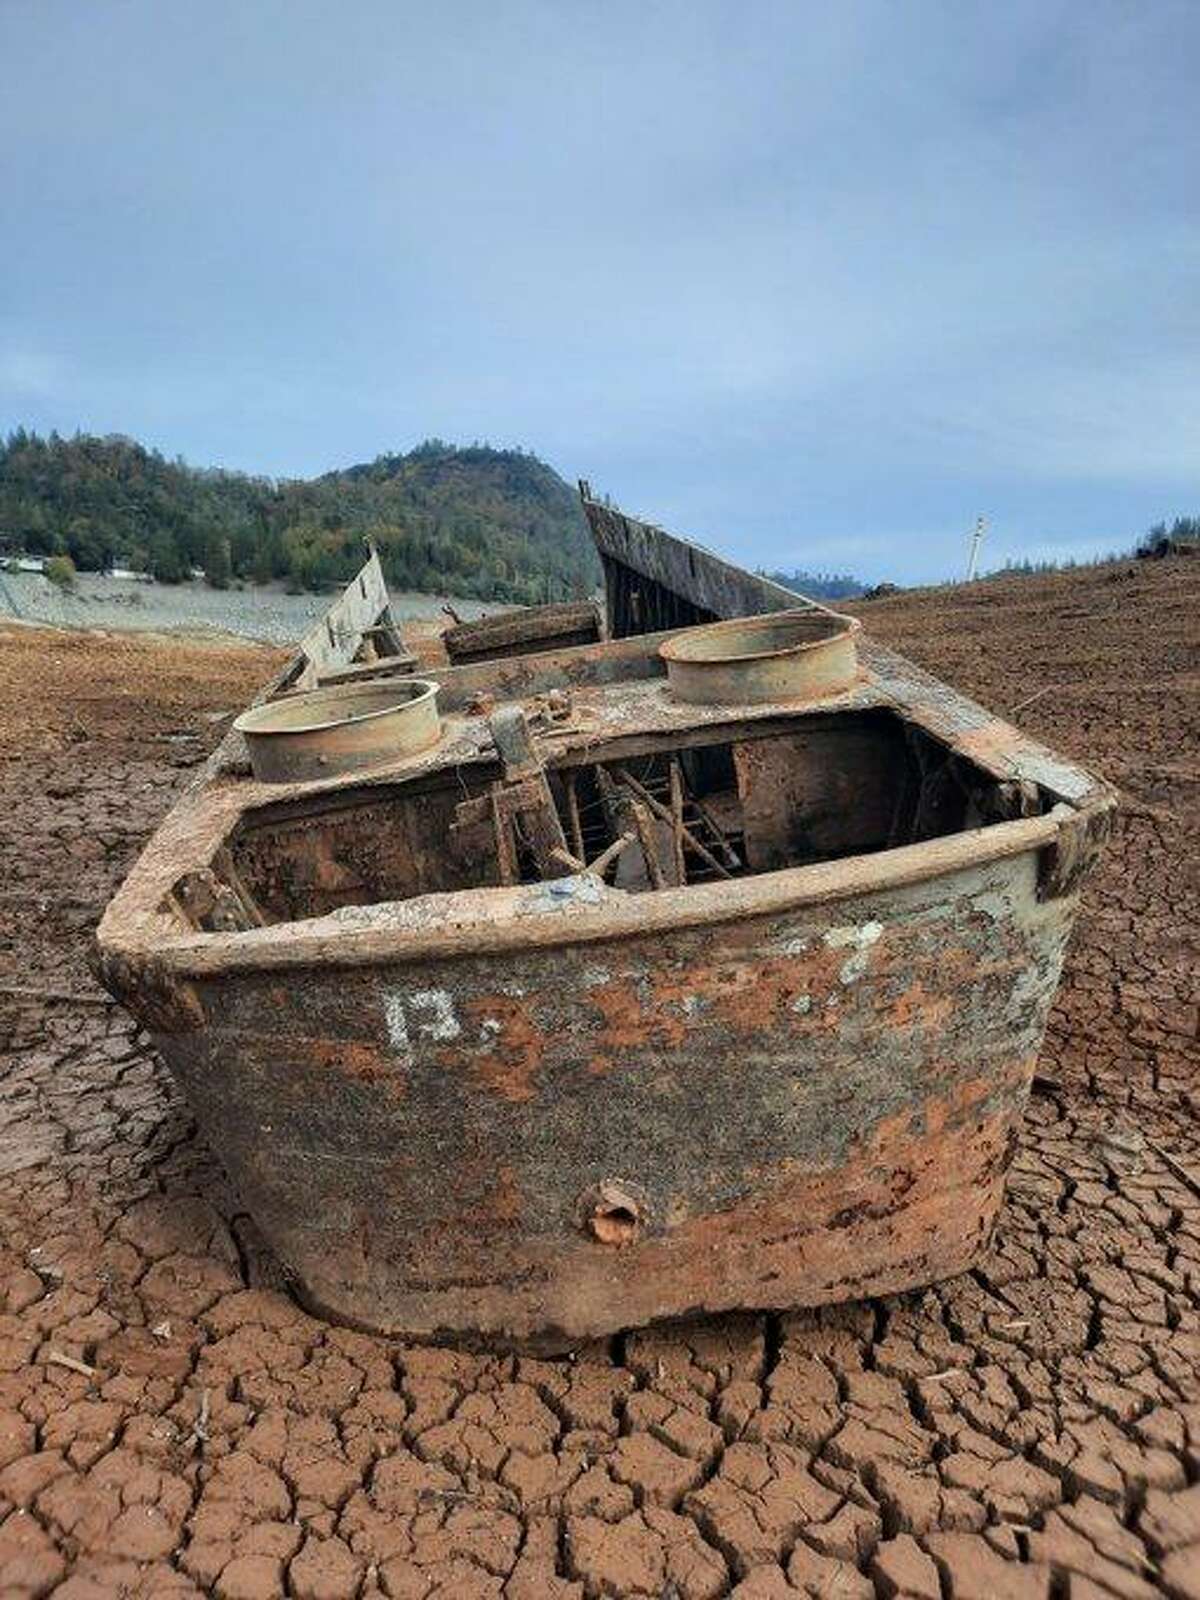 A rusty World War II era boat with a venerable historic past was found in the receding waters of Shasta Lake.